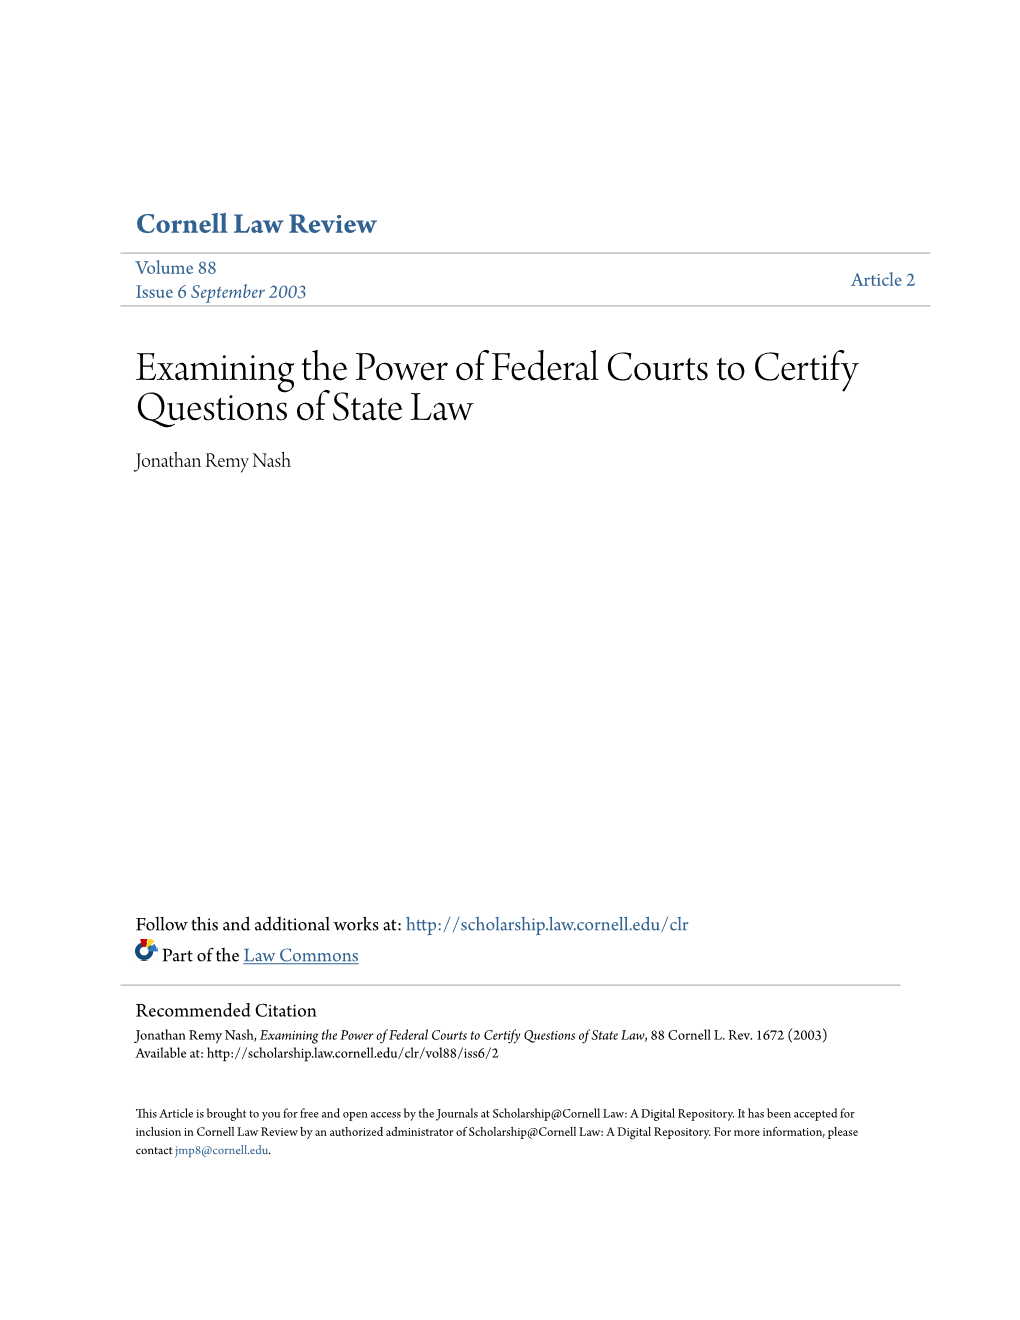 Examining the Power of Federal Courts to Certify Questions of State Law Jonathan Remy Nash